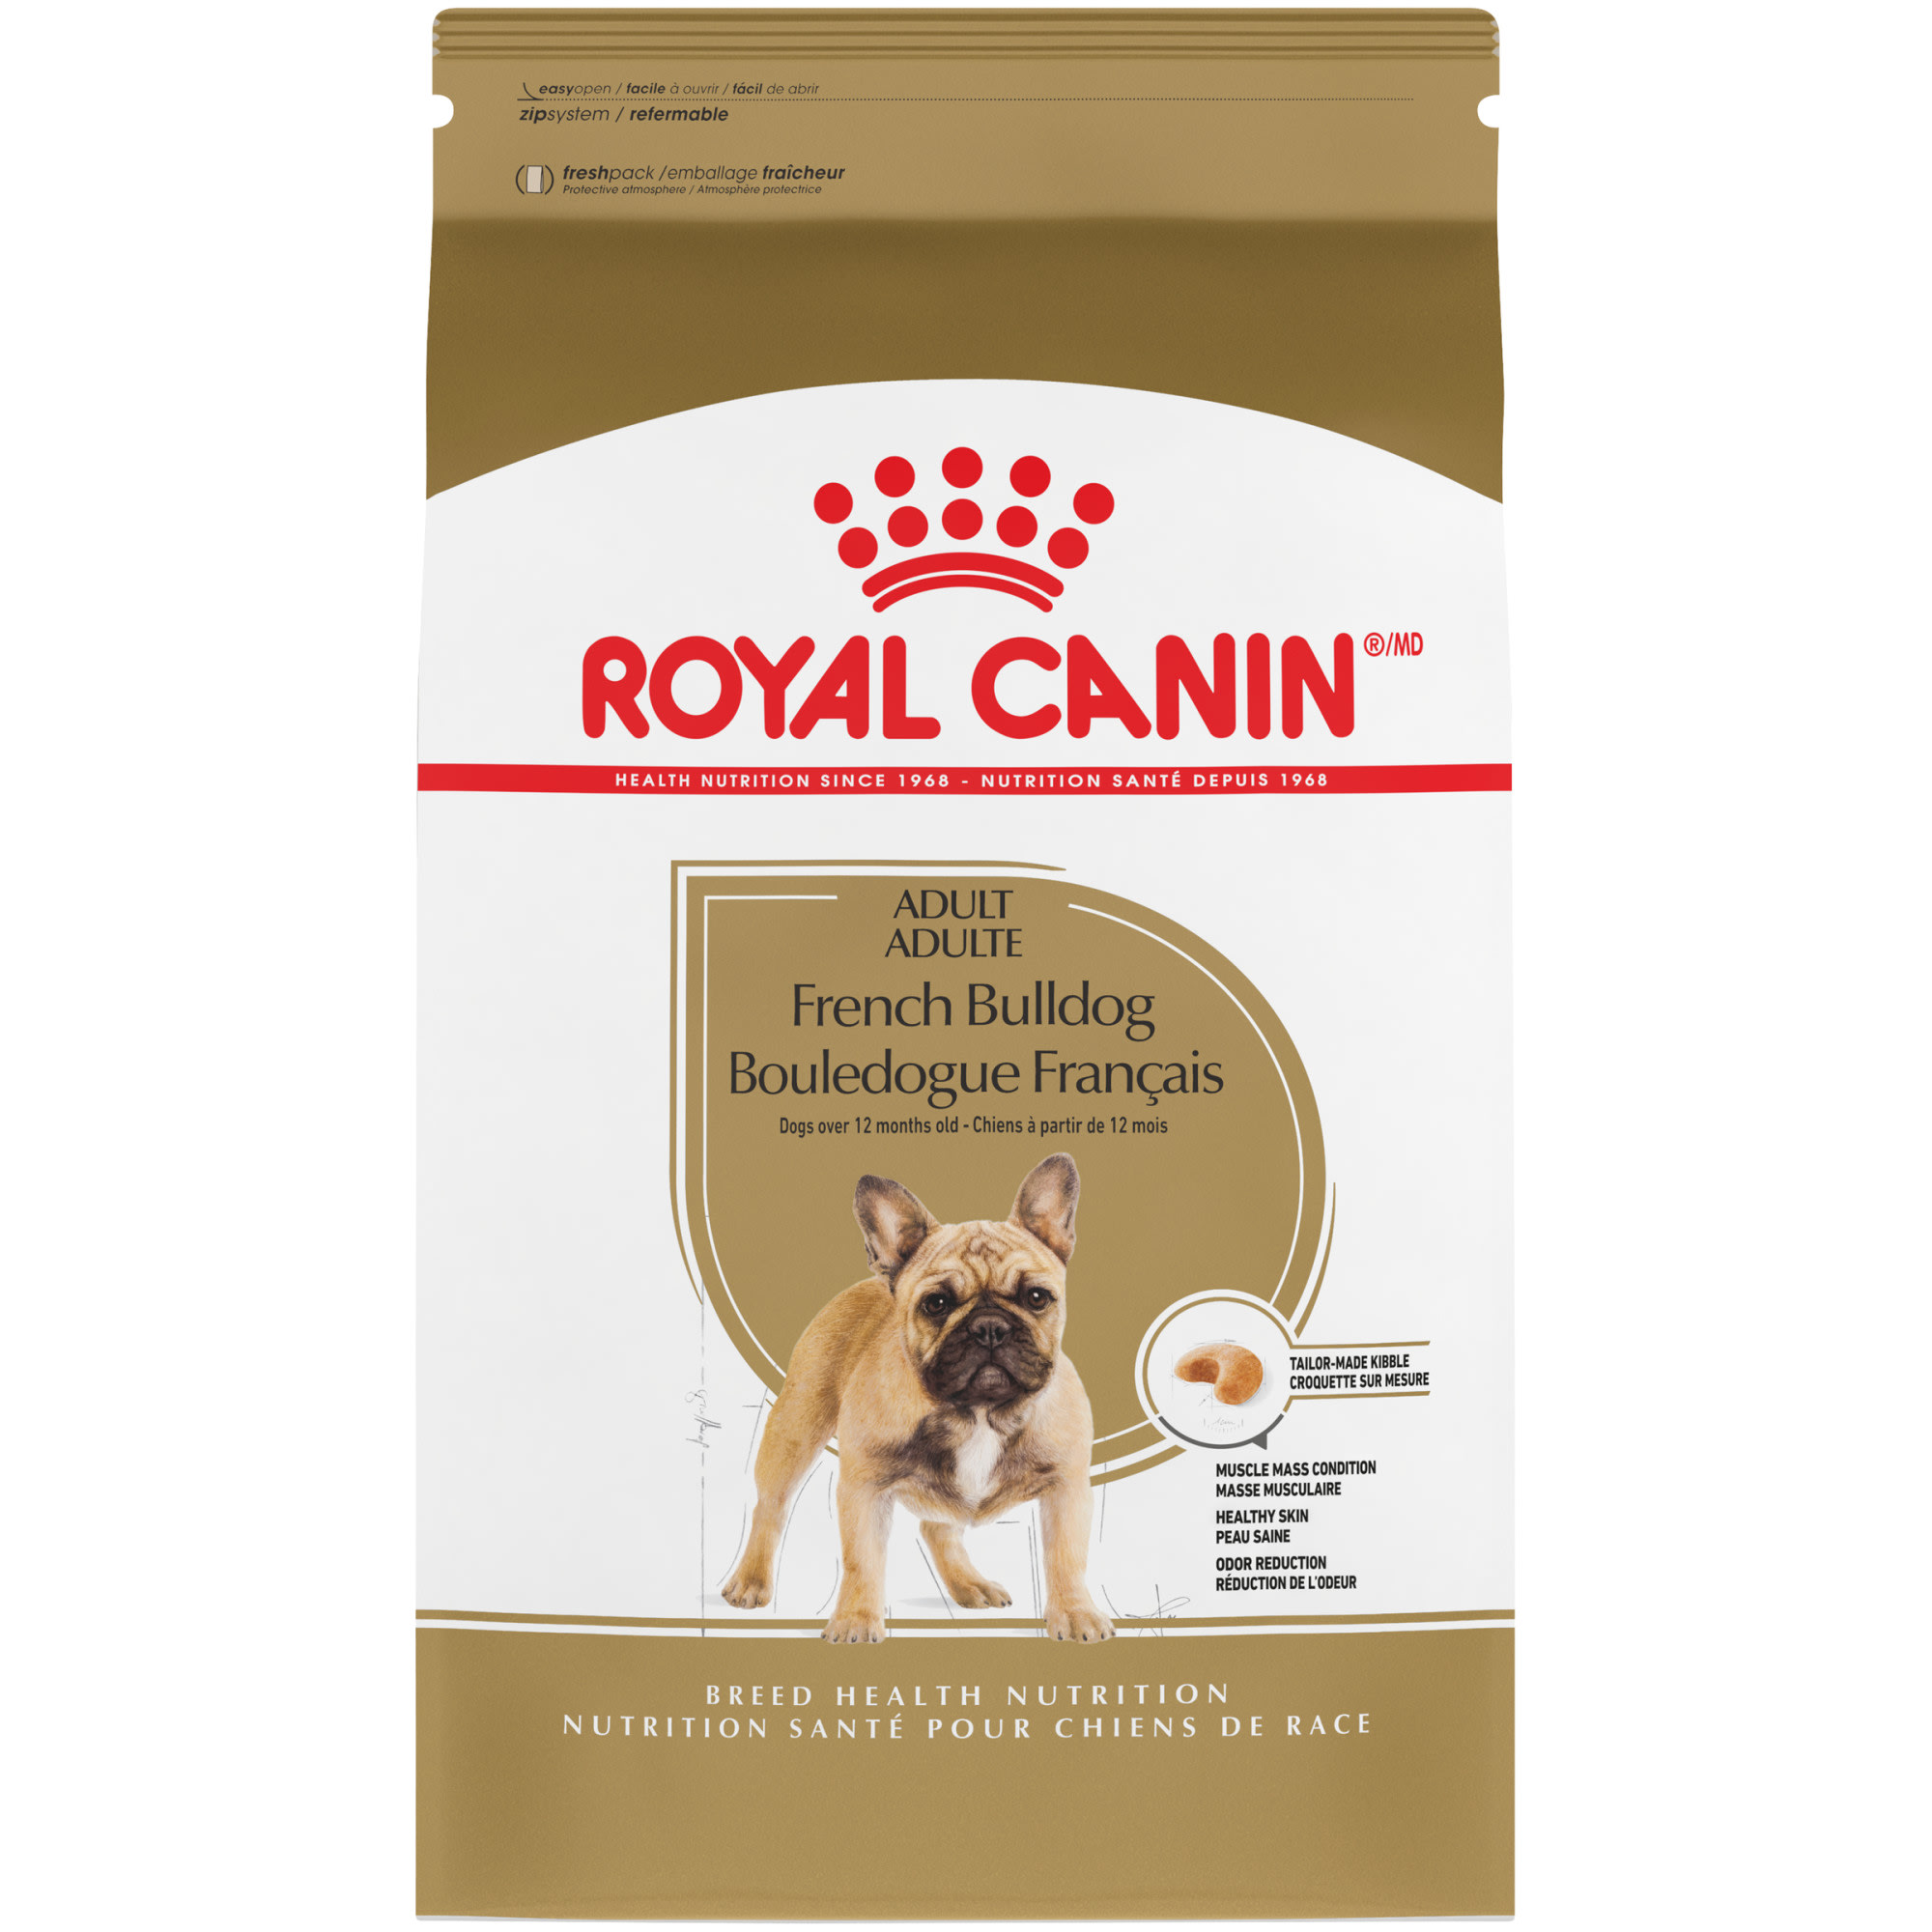 is royal canin french bulldog hypoallergenic?